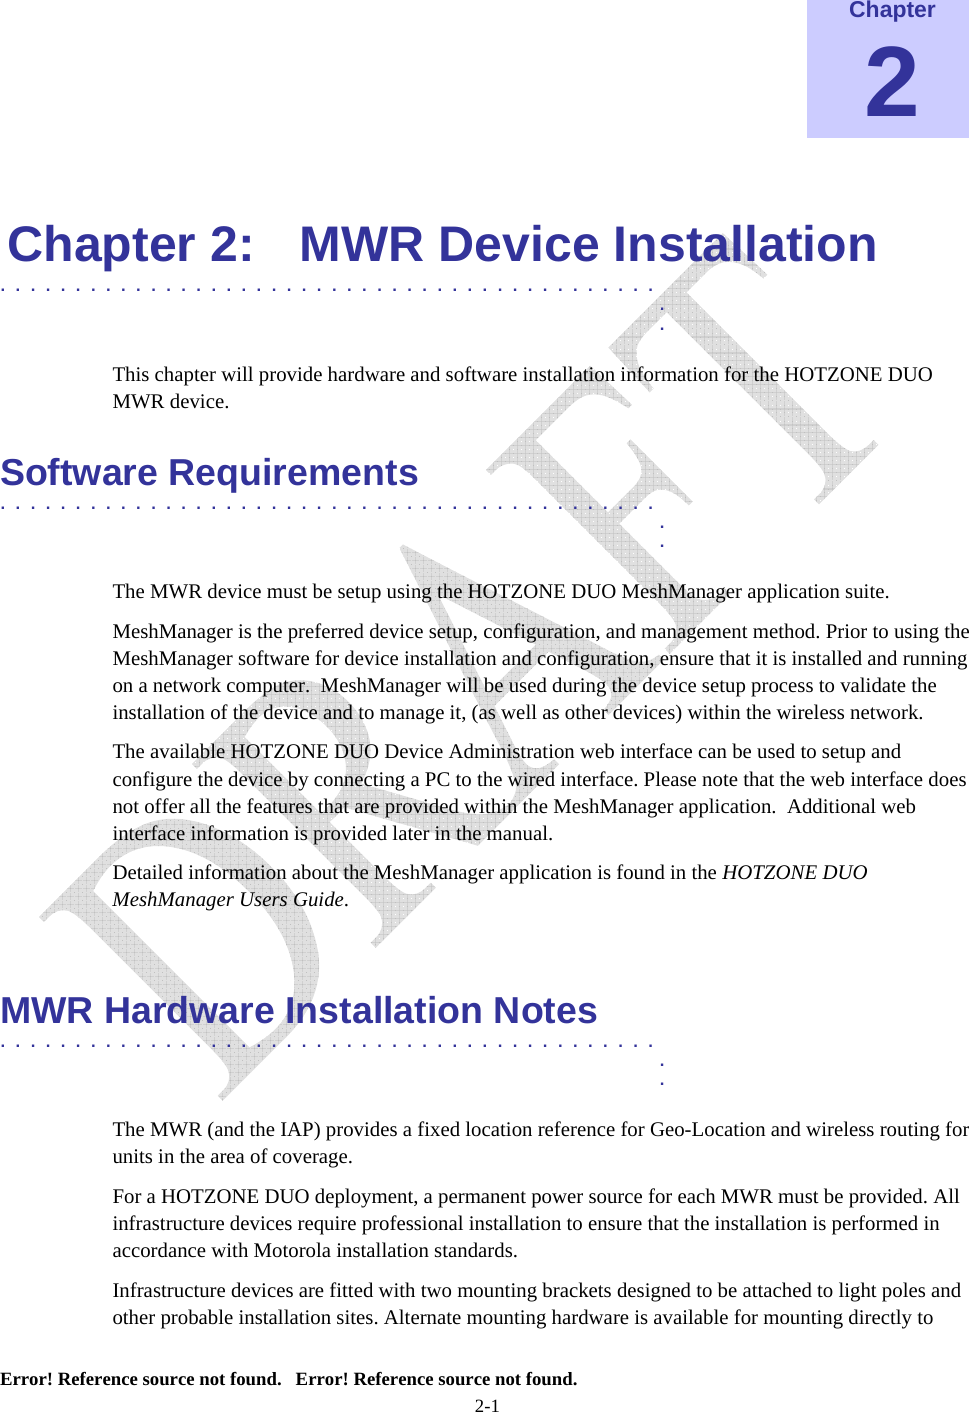    Error! Reference source not found.   Error! Reference source not found. 2-1 Chapter 2  Chapter 2:  MWR Device Installation ............................................   .  . This chapter will provide hardware and software installation information for the HOTZONE DUO MWR device. Software Requirements ............................................   .  . The MWR device must be setup using the HOTZONE DUO MeshManager application suite. MeshManager is the preferred device setup, configuration, and management method. Prior to using the MeshManager software for device installation and configuration, ensure that it is installed and running on a network computer.  MeshManager will be used during the device setup process to validate the installation of the device and to manage it, (as well as other devices) within the wireless network. The available HOTZONE DUO Device Administration web interface can be used to setup and configure the device by connecting a PC to the wired interface. Please note that the web interface does not offer all the features that are provided within the MeshManager application.  Additional web interface information is provided later in the manual. Detailed information about the MeshManager application is found in the HOTZONE DUO MeshManager Users Guide.  MWR Hardware Installation Notes ............................................   .  . The MWR (and the IAP) provides a fixed location reference for Geo-Location and wireless routing for units in the area of coverage. For a HOTZONE DUO deployment, a permanent power source for each MWR must be provided. All infrastructure devices require professional installation to ensure that the installation is performed in accordance with Motorola installation standards. Infrastructure devices are fitted with two mounting brackets designed to be attached to light poles and other probable installation sites. Alternate mounting hardware is available for mounting directly to 